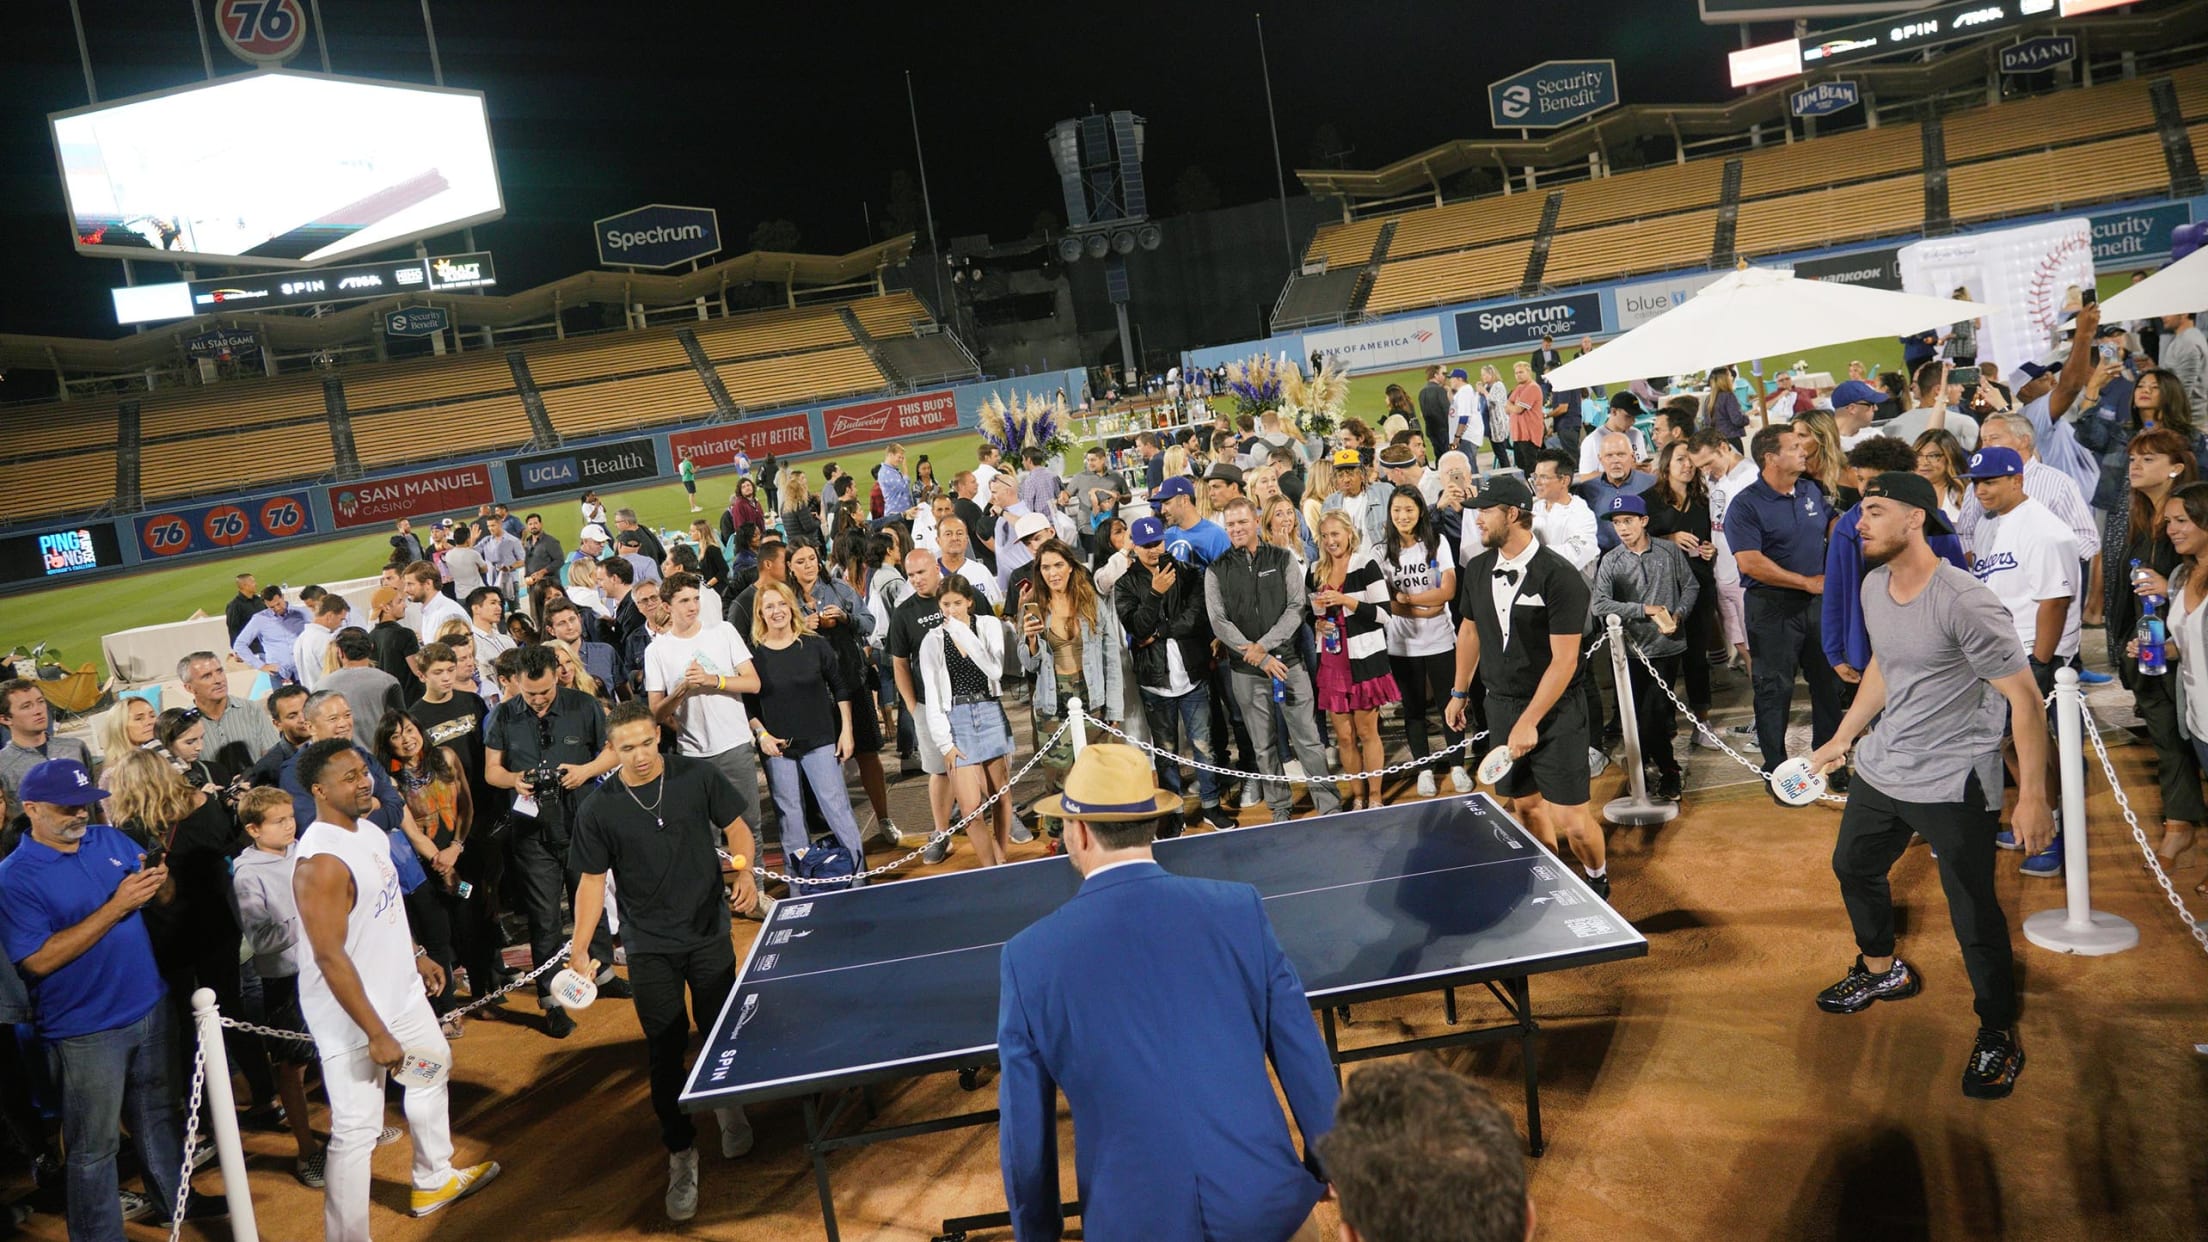 Clayton Kershaw and Family Attend Charity Ping Pong Tournament